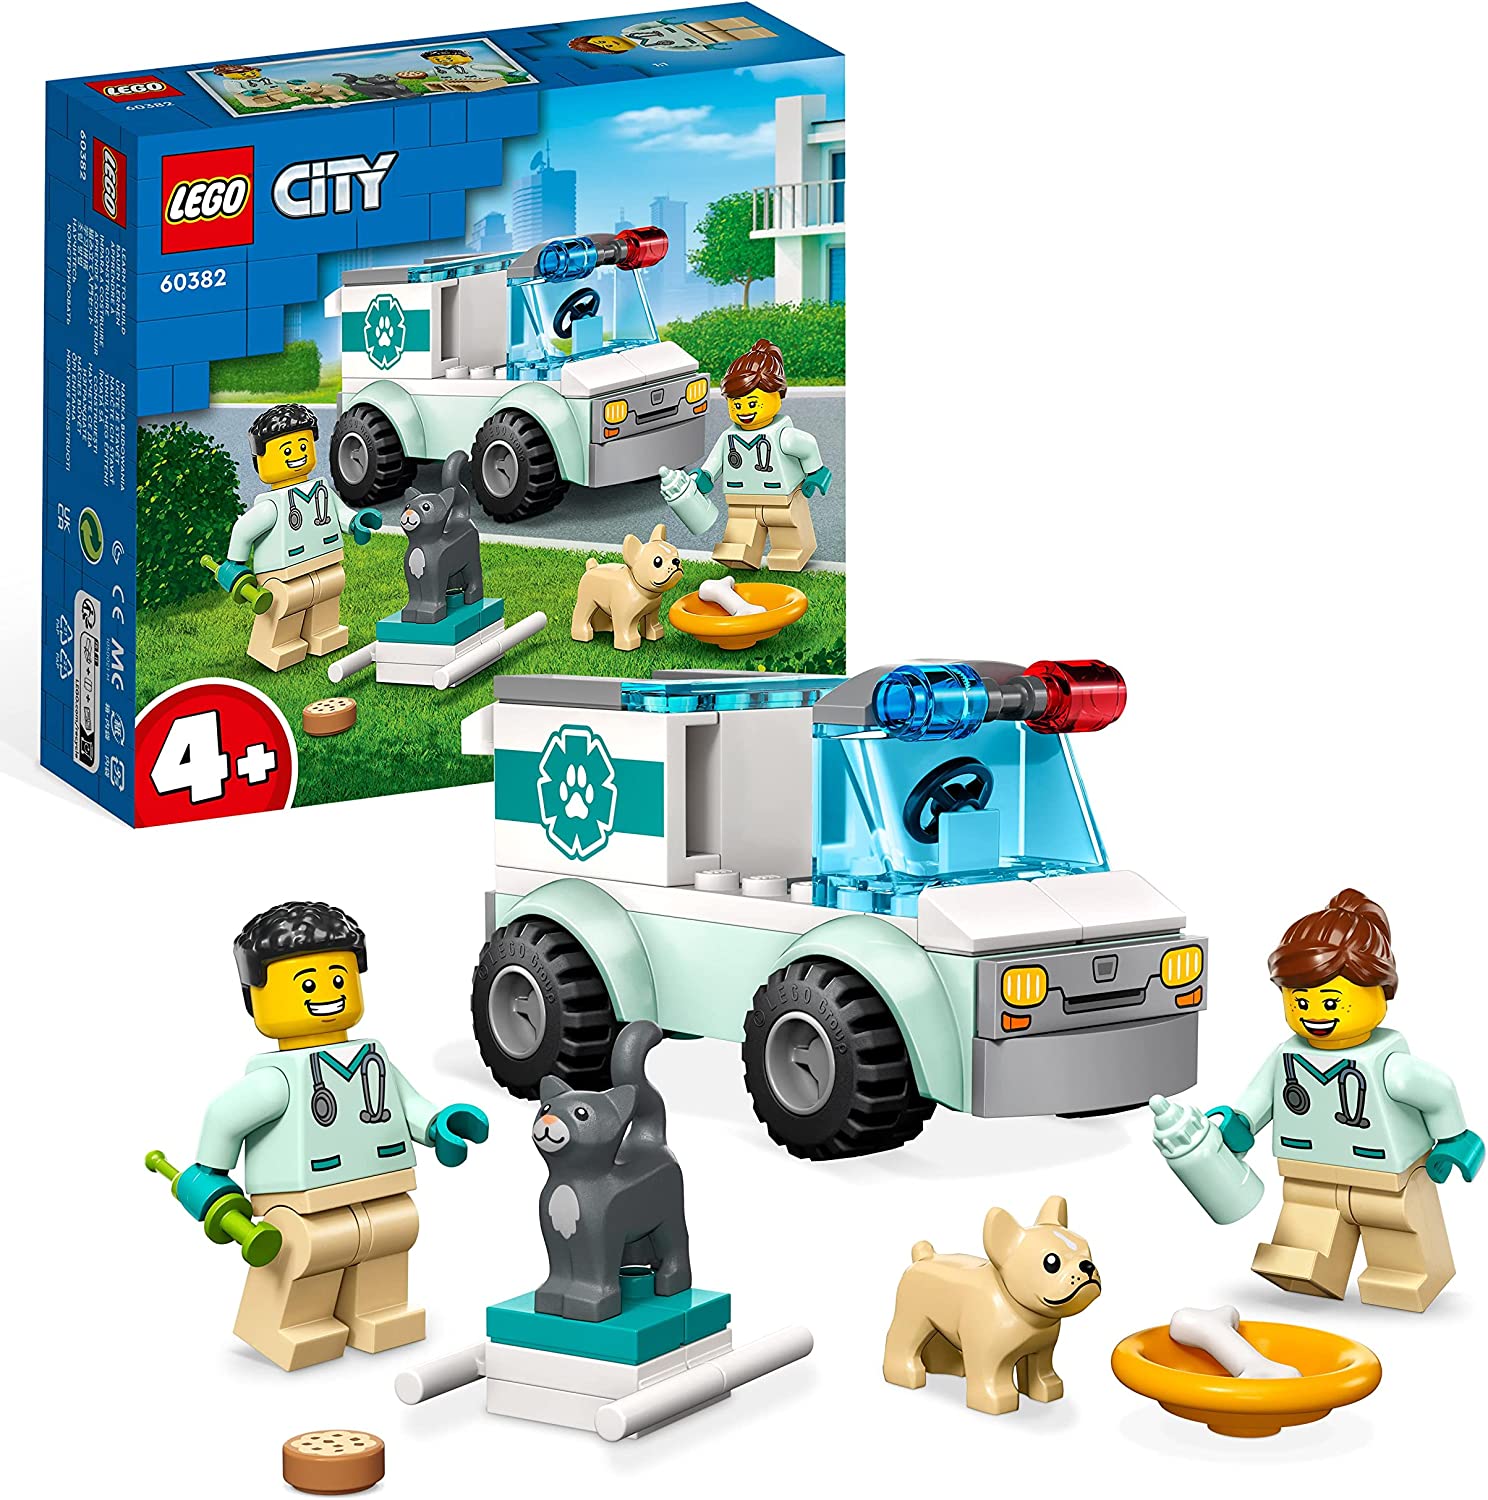 LEGO 60382 City Animal Rescue Car, Animal Toy with Dog and Cat Figures and 2 Veterinary Mini Figures, for Children from 4 Years